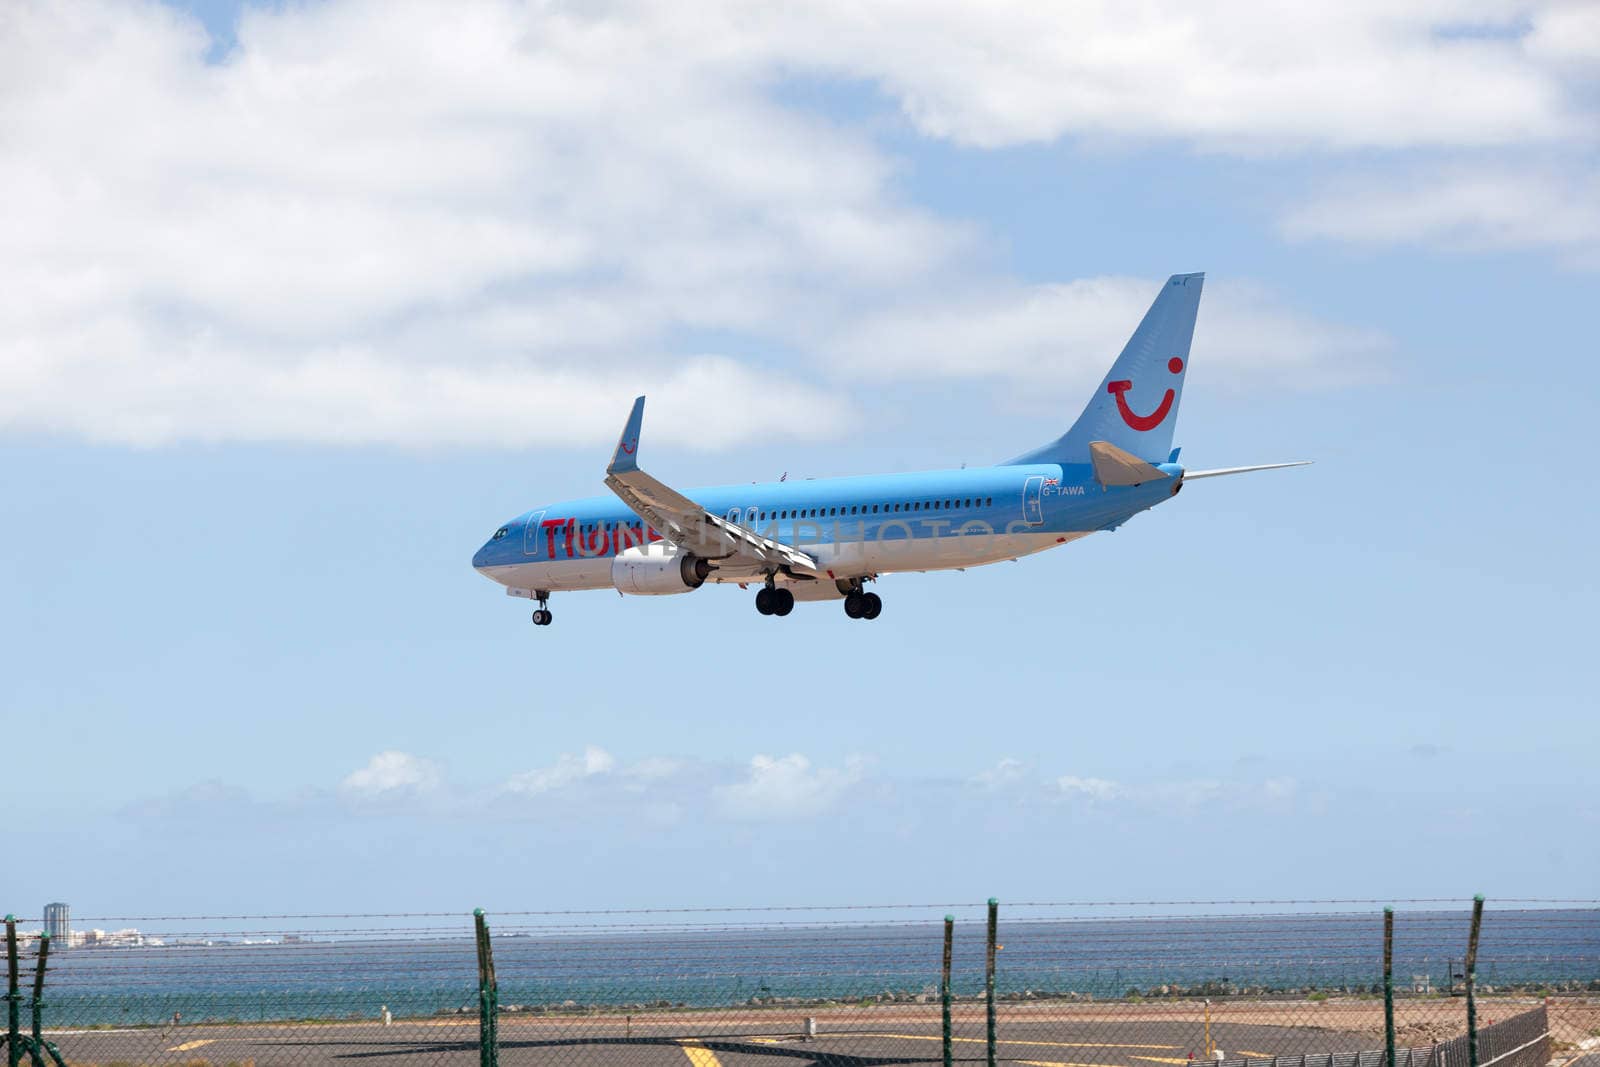 Arrecife, Spain, Mars 24.2013: Thomson one Boeing 737-800 is coming in for landing at the Airport on Lanzarote